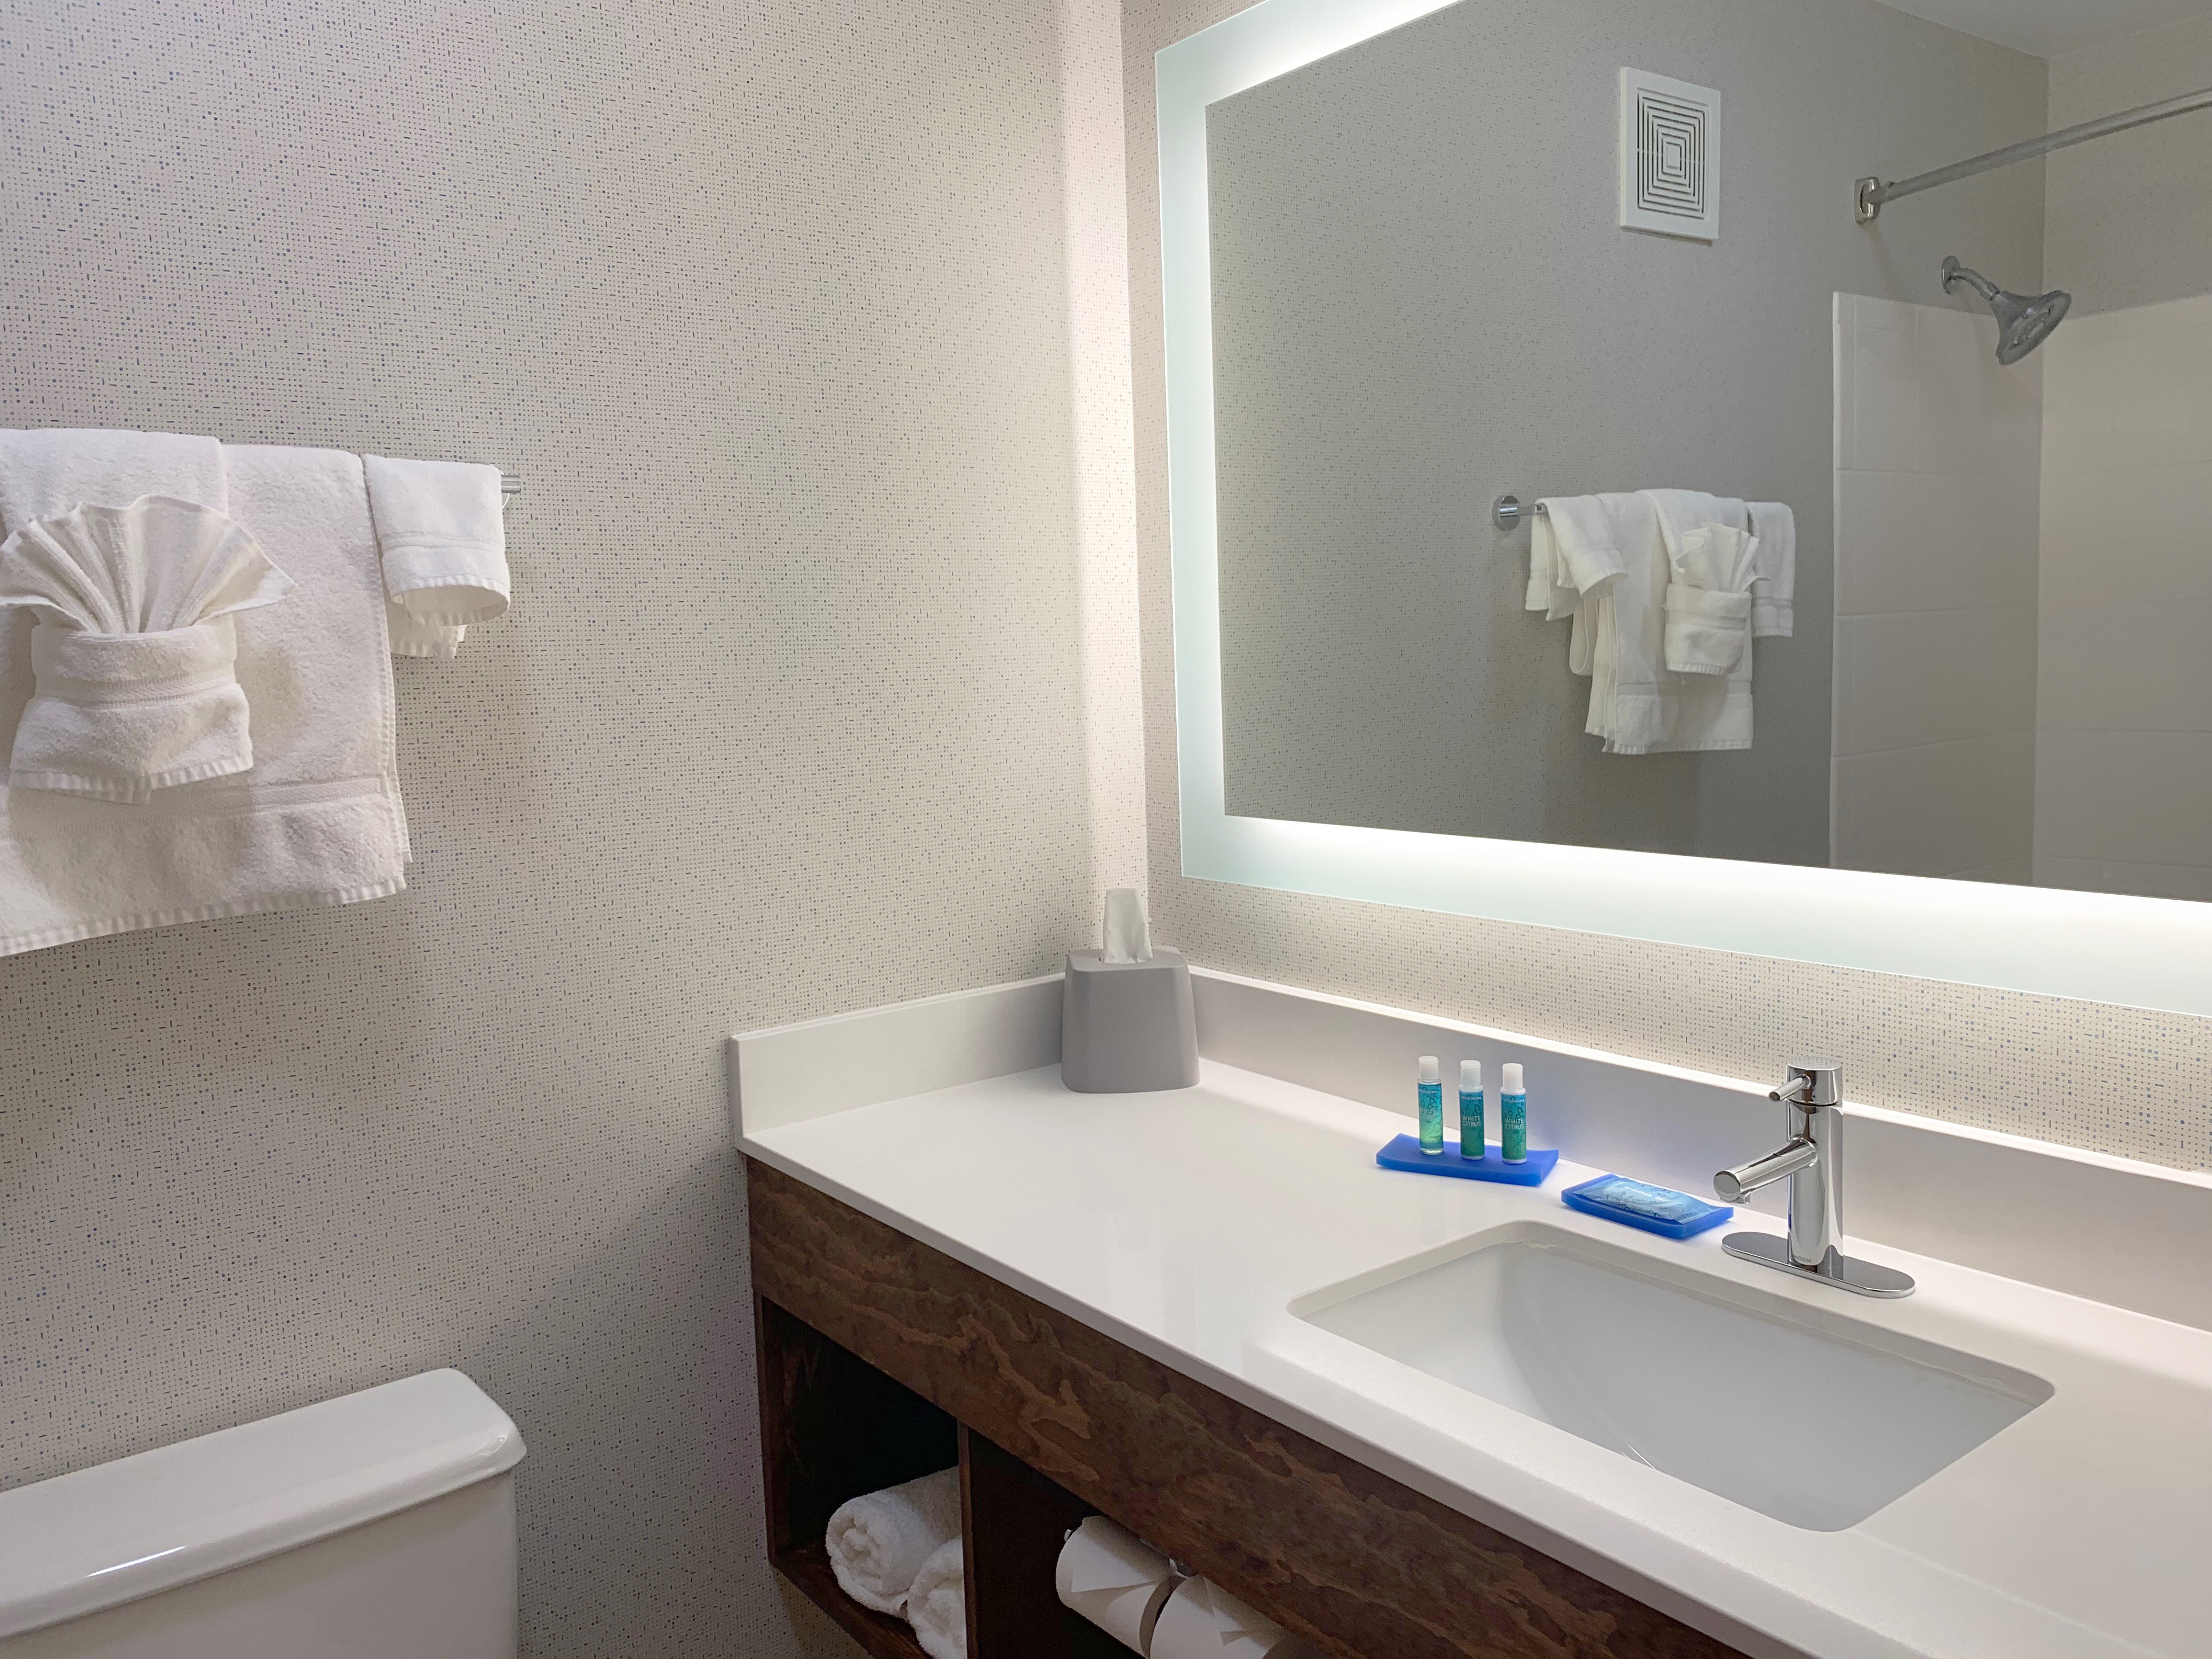 Our Danville hotel bathrooms offer plenty of counter top space.